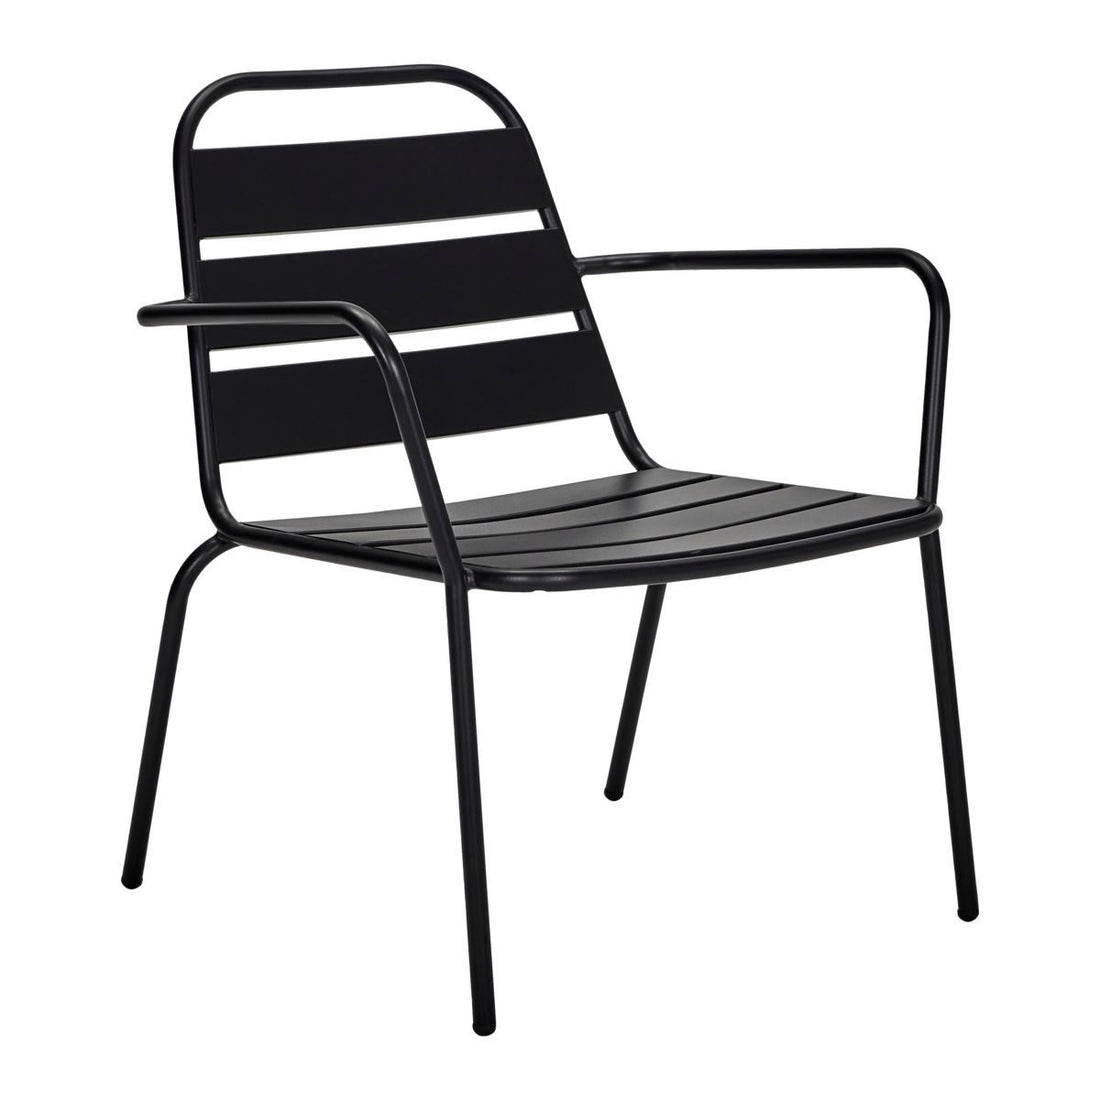 House Doctor Lounge Chair, Hdhelo, Black